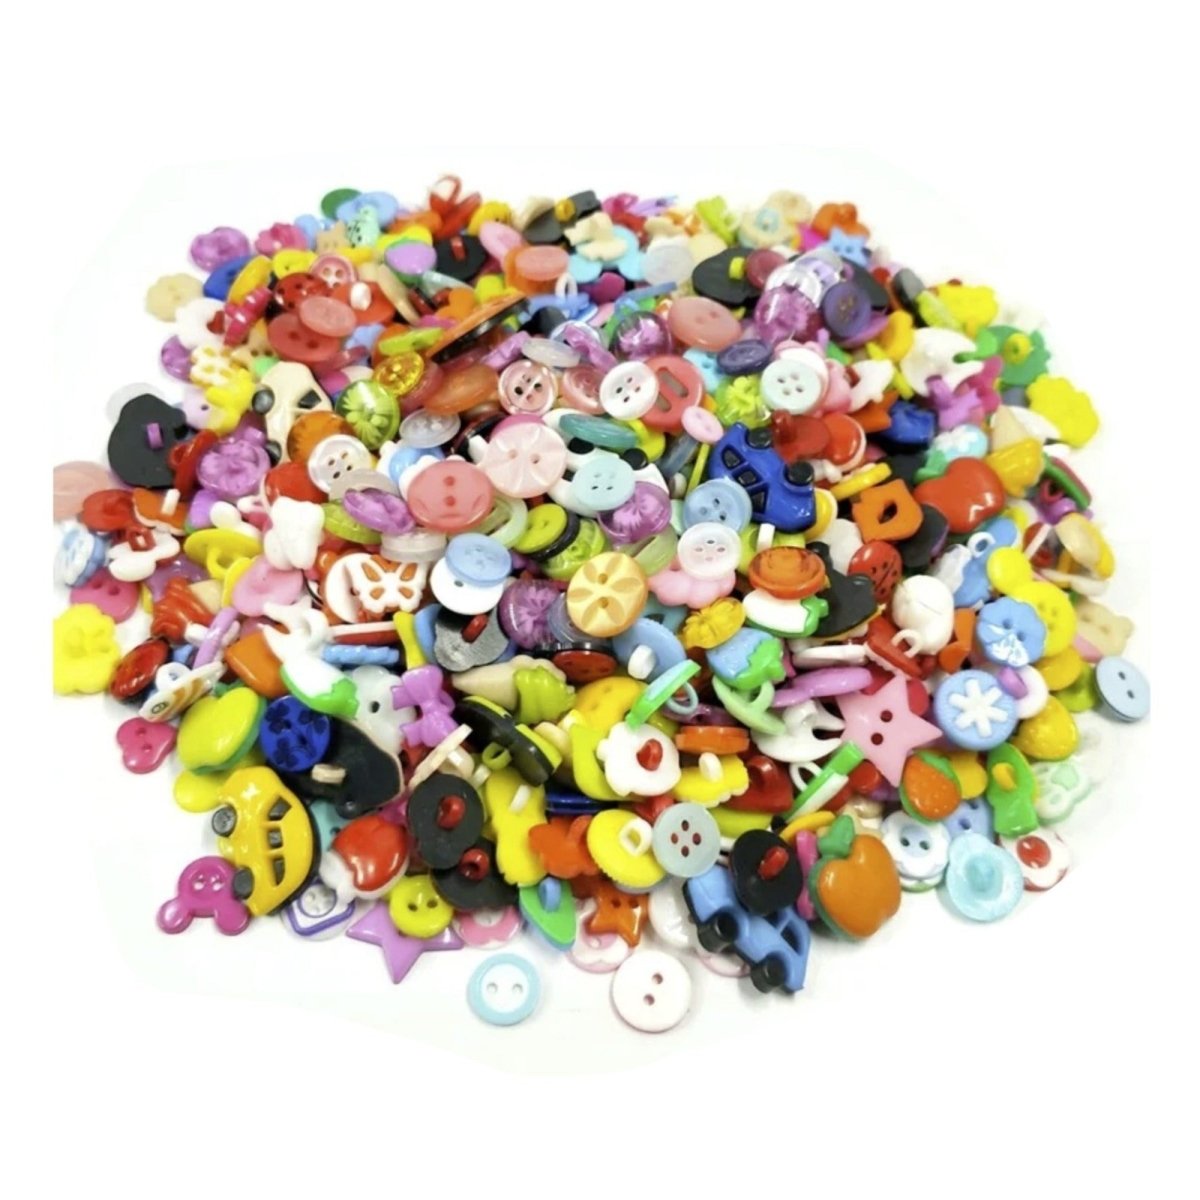 50/100pcs Mixed Shapes Buttons and Brooches for Kids Clothing Plastic Colourful Sewing - 50pcs Set B - - Asia Sell